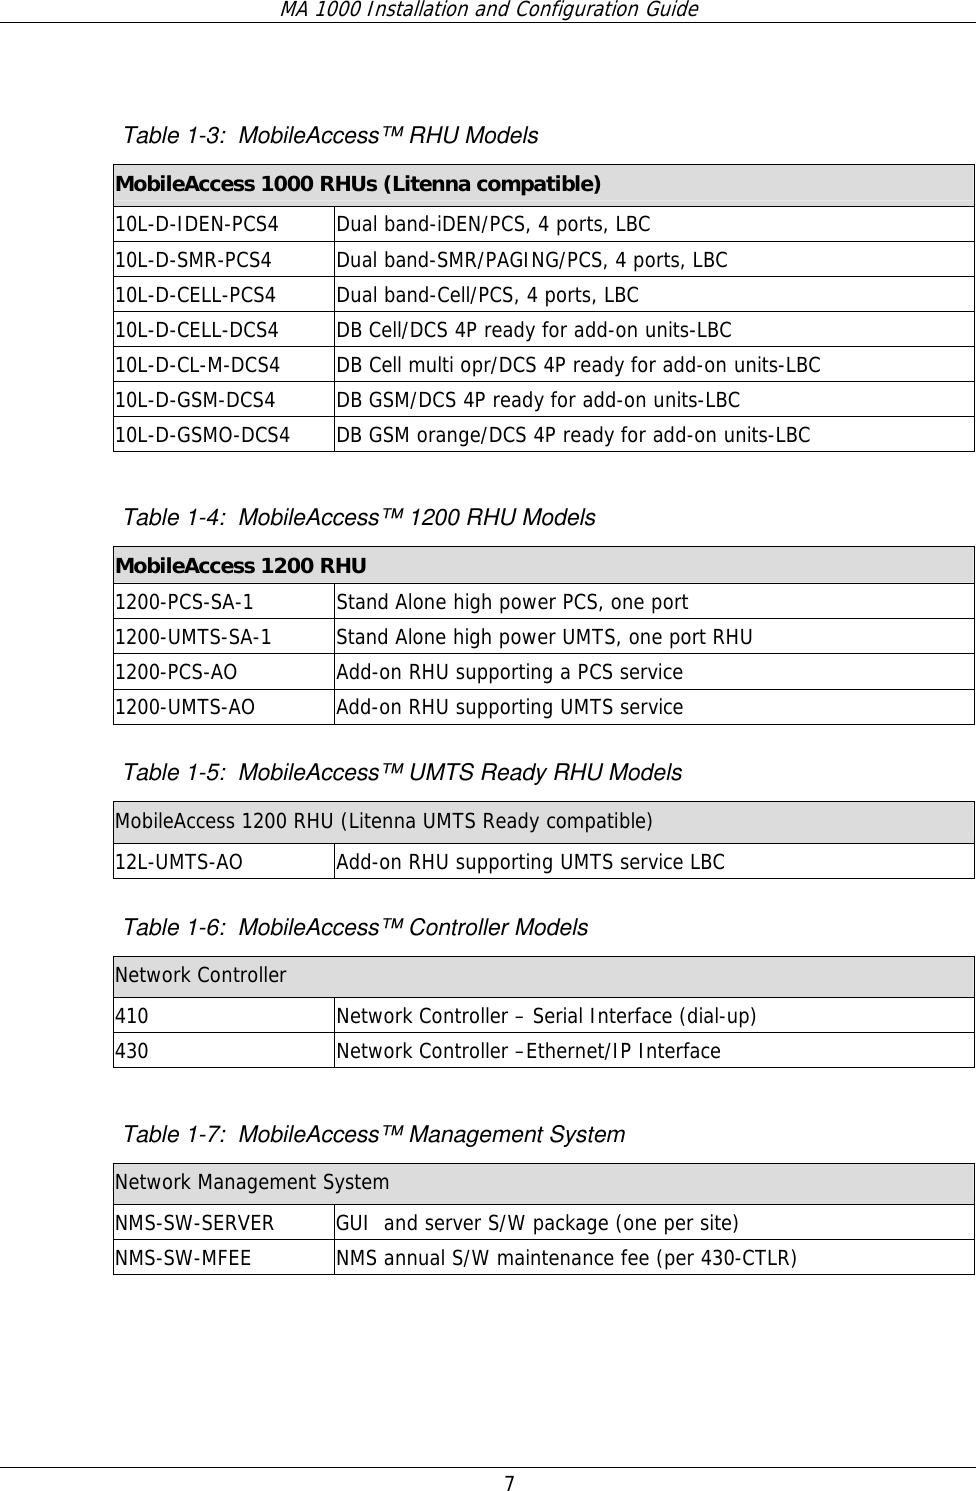 MA 1000 Installation and Configuration Guide  7  Table  1-3:  MobileAccess™ RHU Models MobileAccess 1000 RHUs (Litenna compatible) 10L-D-IDEN-PCS4  Dual band-iDEN/PCS, 4 ports, LBC 10L-D-SMR-PCS4  Dual band-SMR/PAGING/PCS, 4 ports, LBC 10L-D-CELL-PCS4  Dual band-Cell/PCS, 4 ports, LBC 10L-D-CELL-DCS4  DB Cell/DCS 4P ready for add-on units-LBC 10L-D-CL-M-DCS4  DB Cell multi opr/DCS 4P ready for add-on units-LBC 10L-D-GSM-DCS4  DB GSM/DCS 4P ready for add-on units-LBC 10L-D-GSMO-DCS4  DB GSM orange/DCS 4P ready for add-on units-LBC  Table  1-4:  MobileAccess™ 1200 RHU Models MobileAccess 1200 RHU 1200-PCS-SA-1  Stand Alone high power PCS, one port 1200-UMTS-SA-1  Stand Alone high power UMTS, one port RHU 1200-PCS-AO  Add-on RHU supporting a PCS service 1200-UMTS-AO  Add-on RHU supporting UMTS service  Table  1-5:  MobileAccess™ UMTS Ready RHU Models  MobileAccess 1200 RHU (Litenna UMTS Ready compatible)  12L-UMTS-AO  Add-on RHU supporting UMTS service LBC  Table  1-6:  MobileAccess™ Controller Models Network Controller 410  Network Controller – Serial Interface (dial-up) 430  Network Controller –Ethernet/IP Interface  Table  1-7:  MobileAccess™ Management System Network Management System NMS-SW-SERVER  GUI  and server S/W package (one per site) NMS-SW-MFEE  NMS annual S/W maintenance fee (per 430-CTLR)  